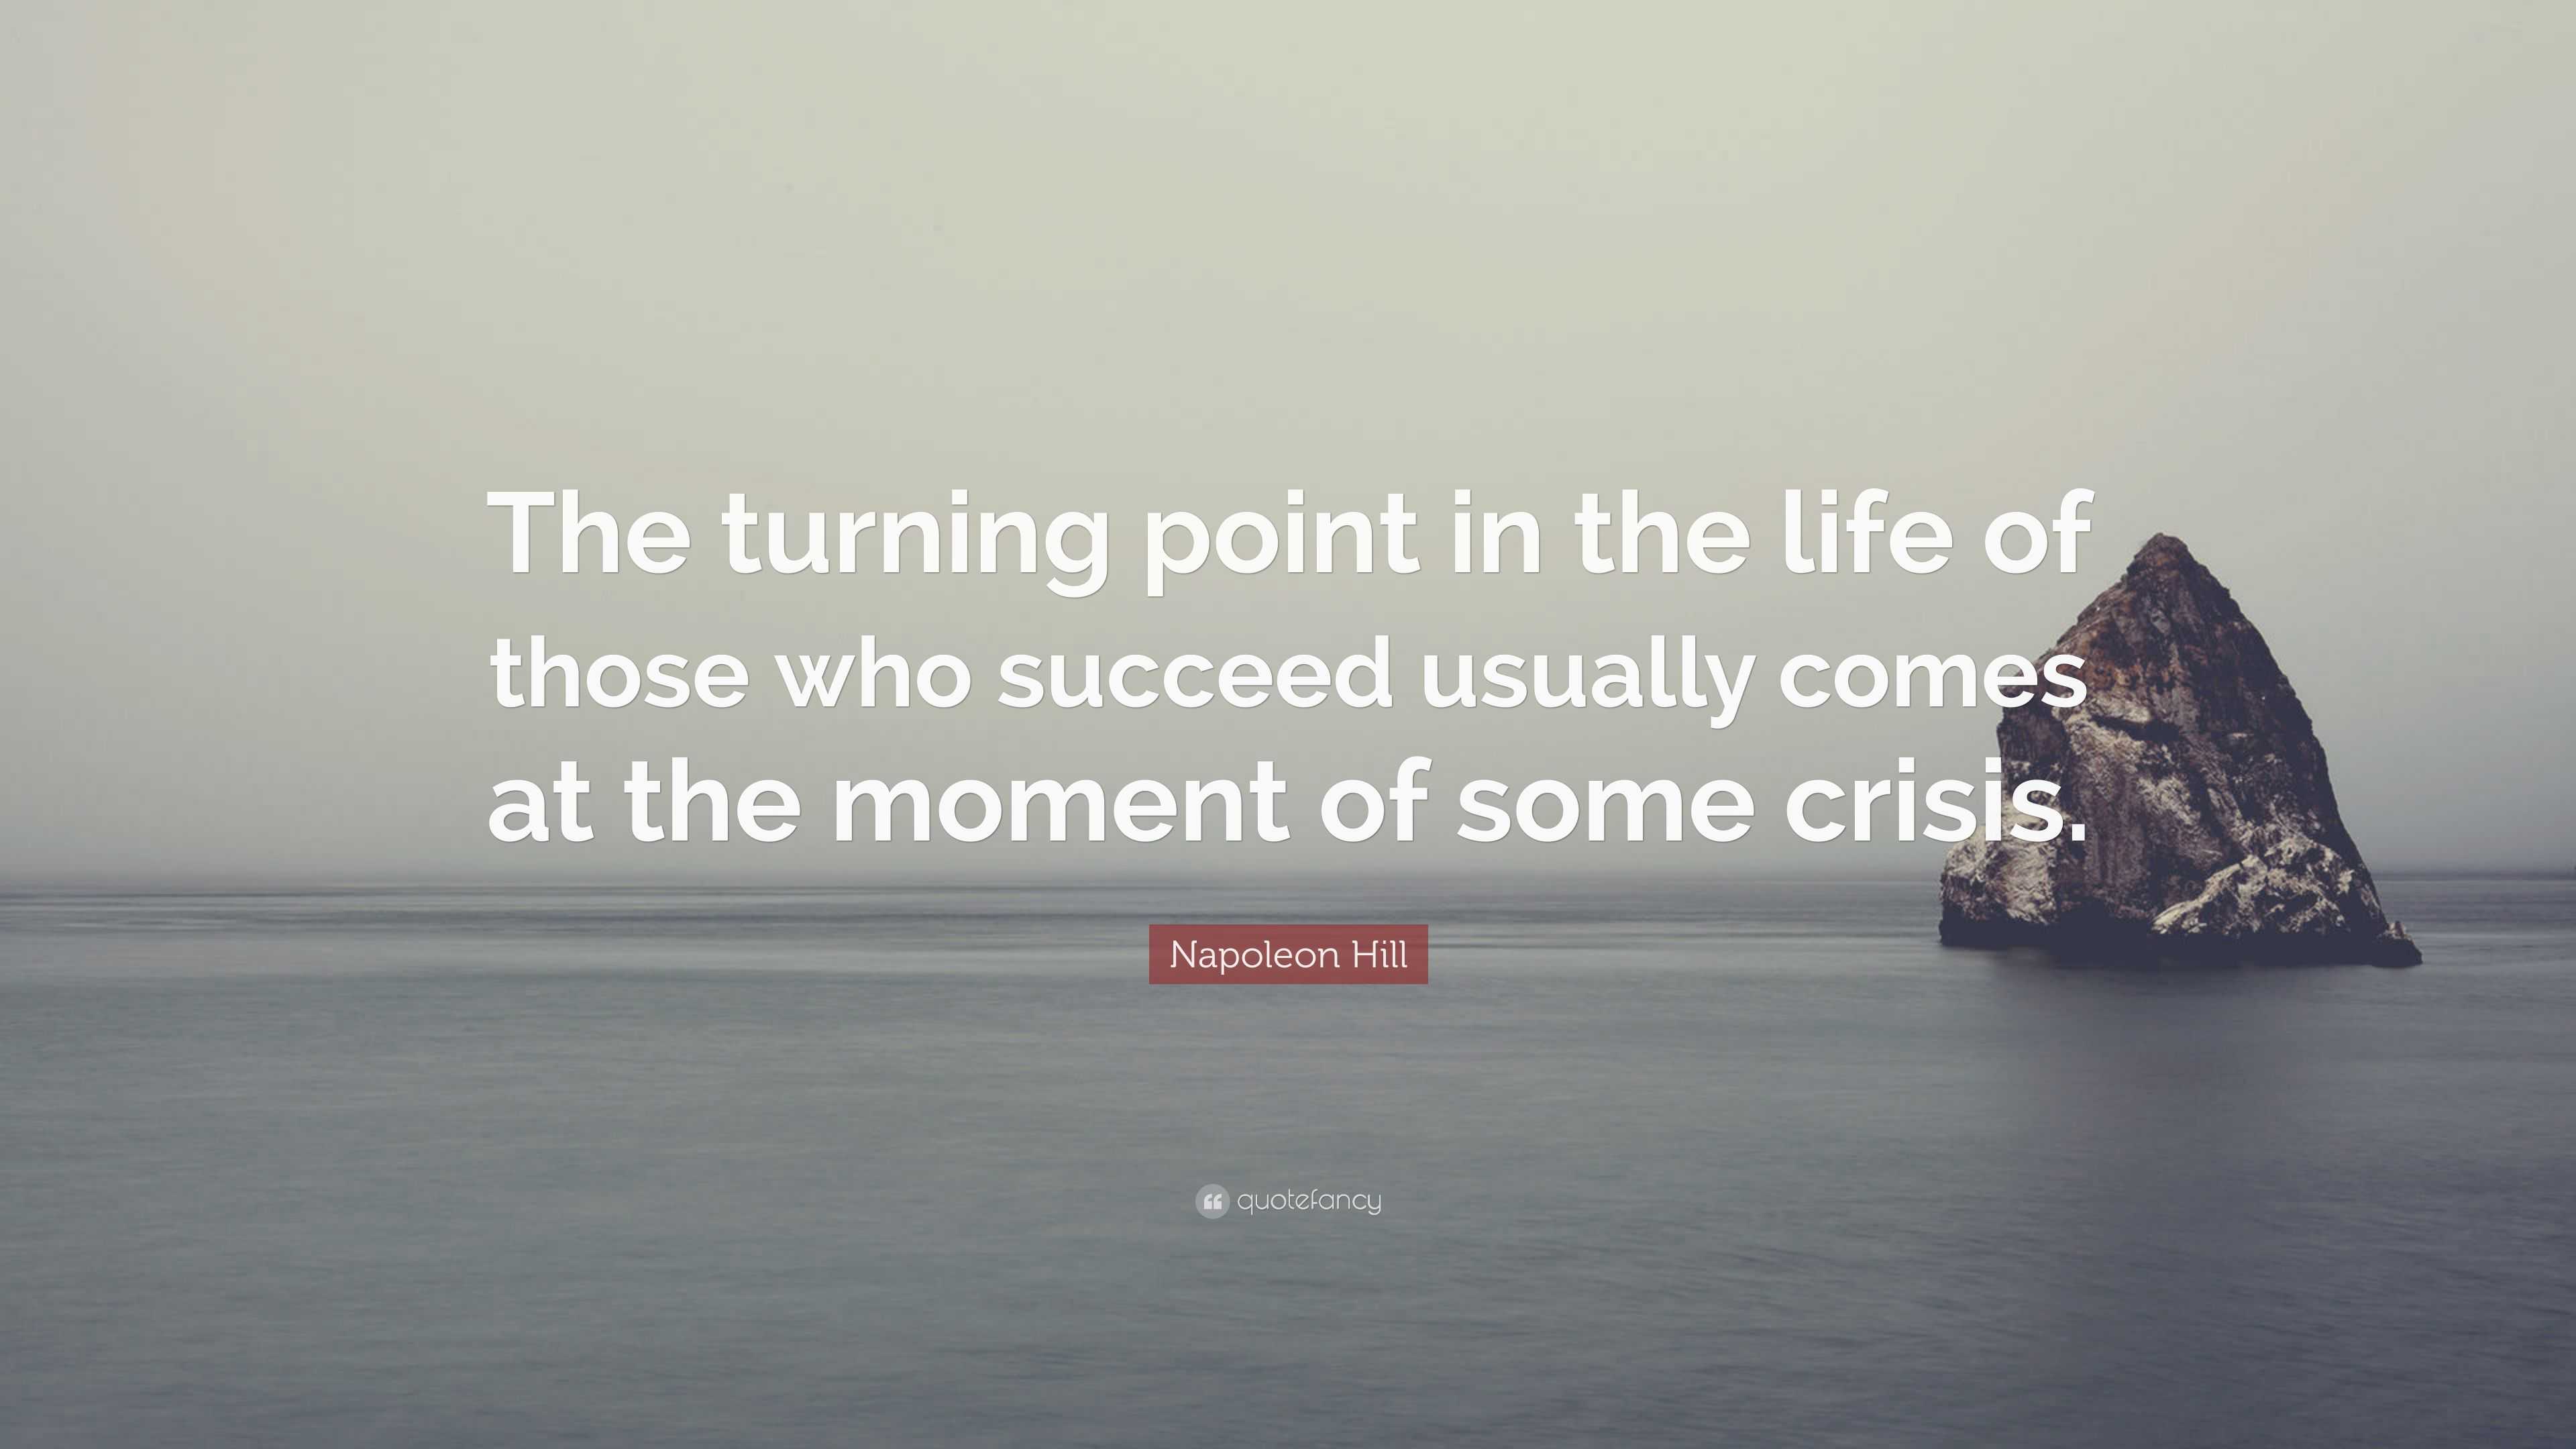 Napoleon Hill Quote: “The turning point in the life of those who succeed  usually comes at